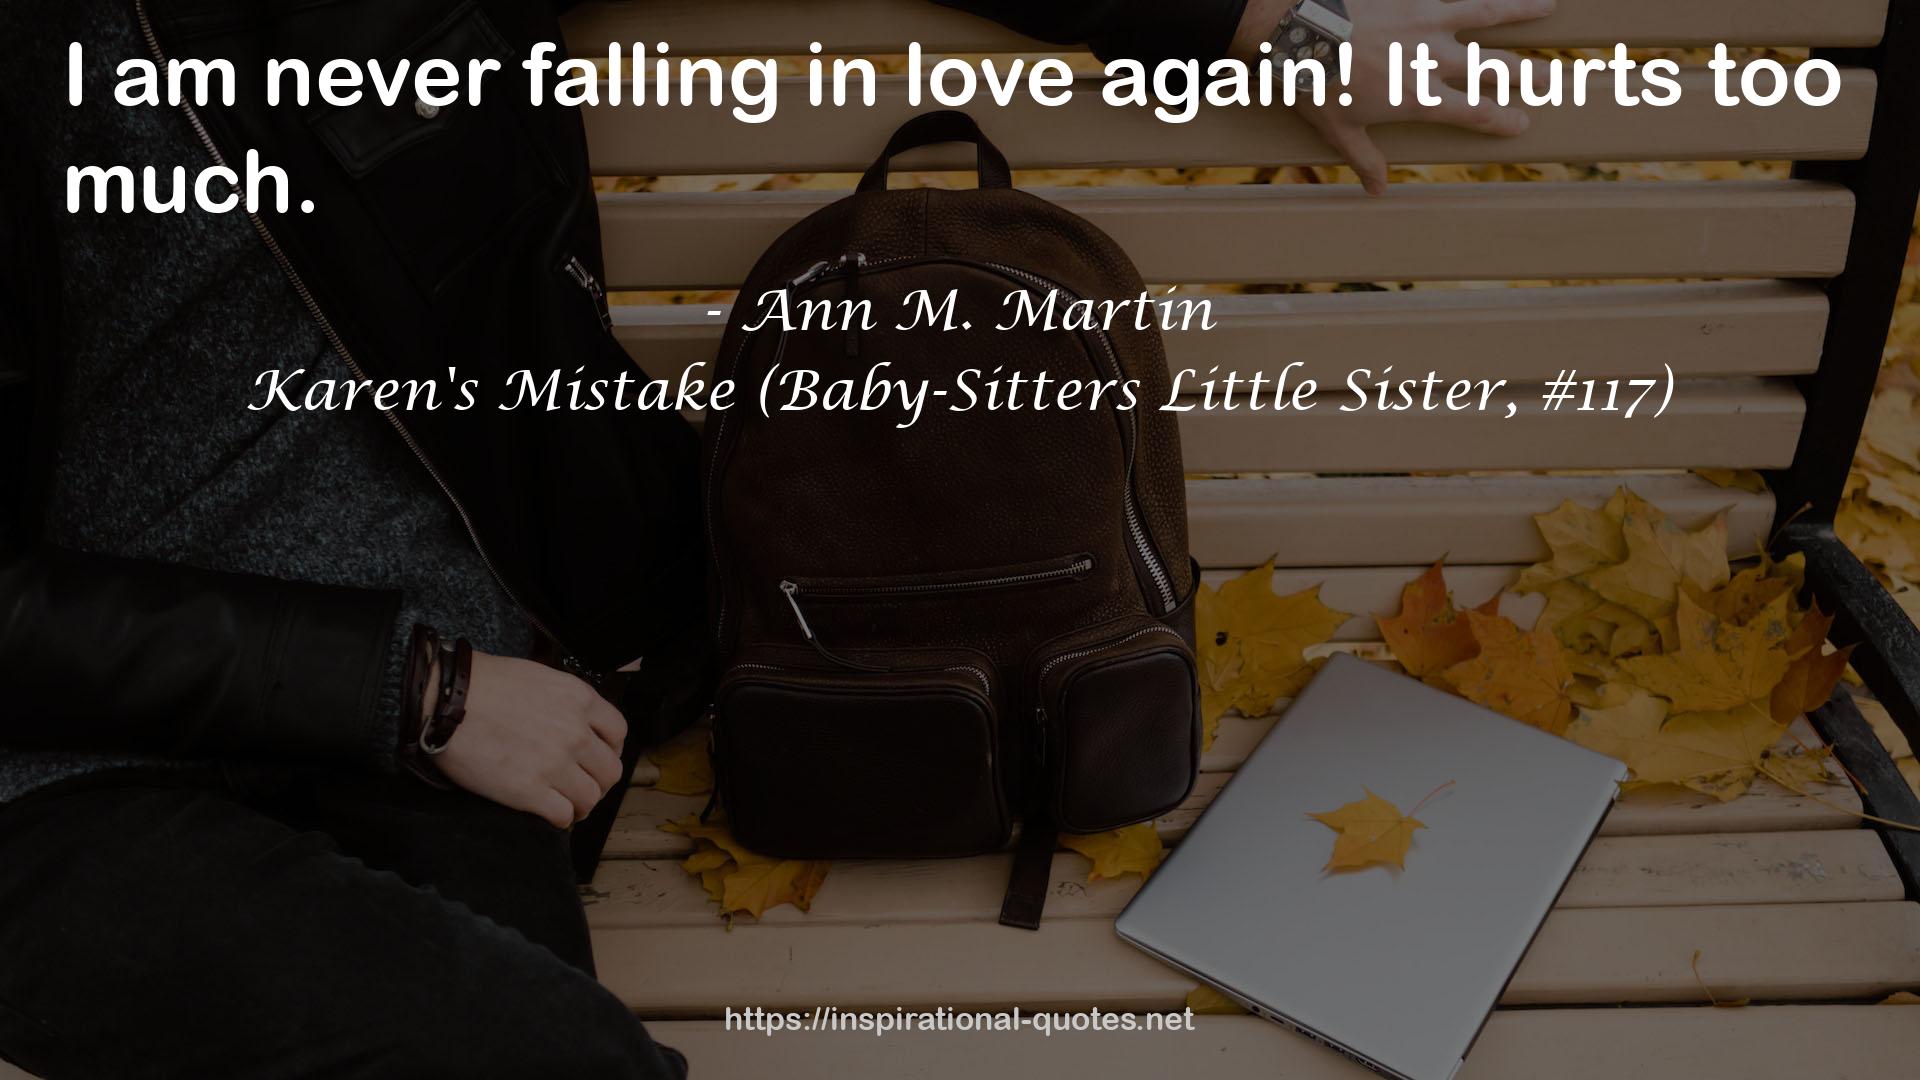 Karen's Mistake (Baby-Sitters Little Sister, #117) QUOTES